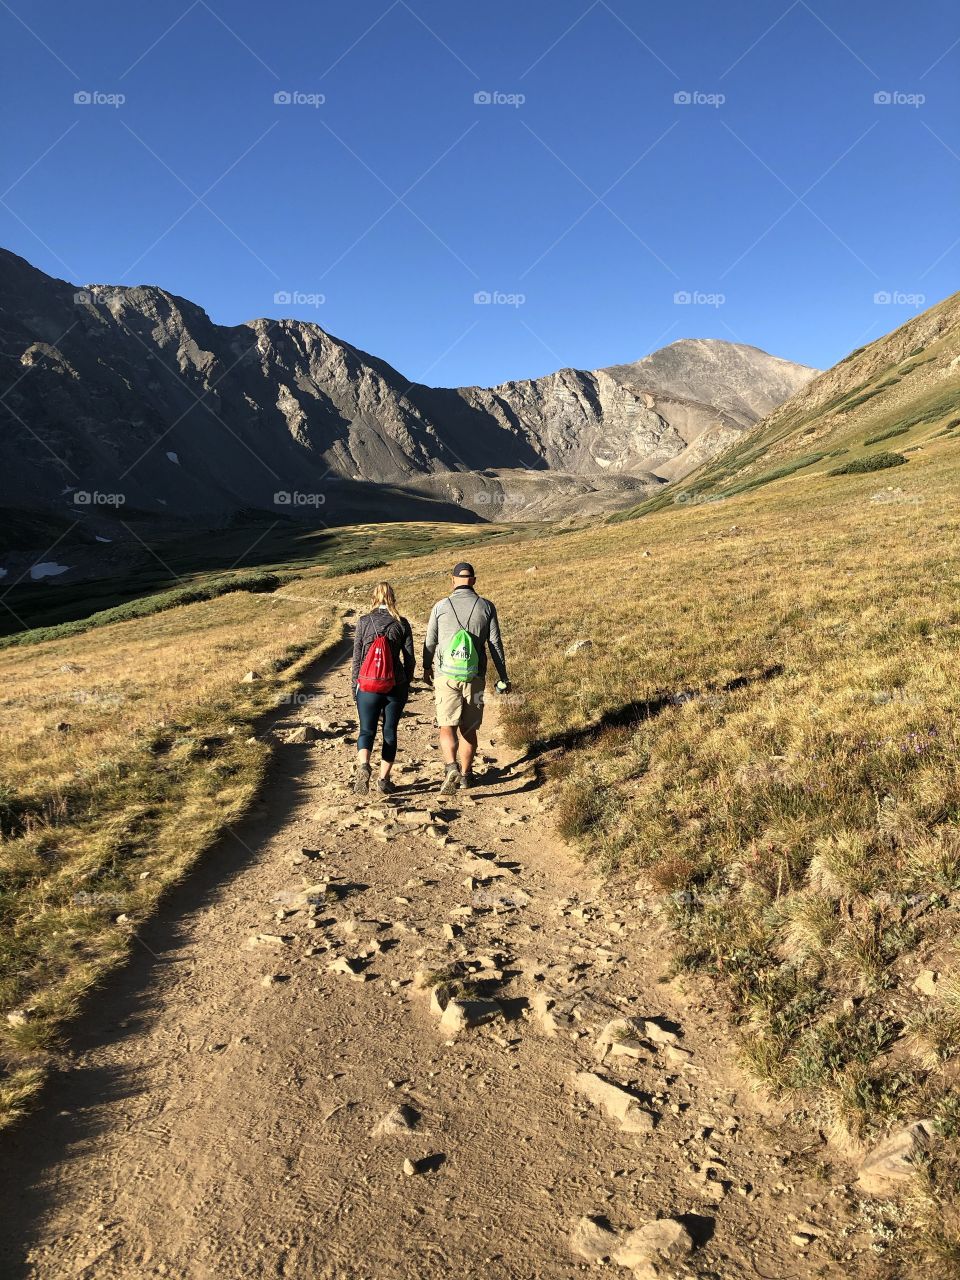 My husband and I hiking our first 14-er in Colorado. The peaks don’t look very far away, but this hike was a physical and mental test for sure. 